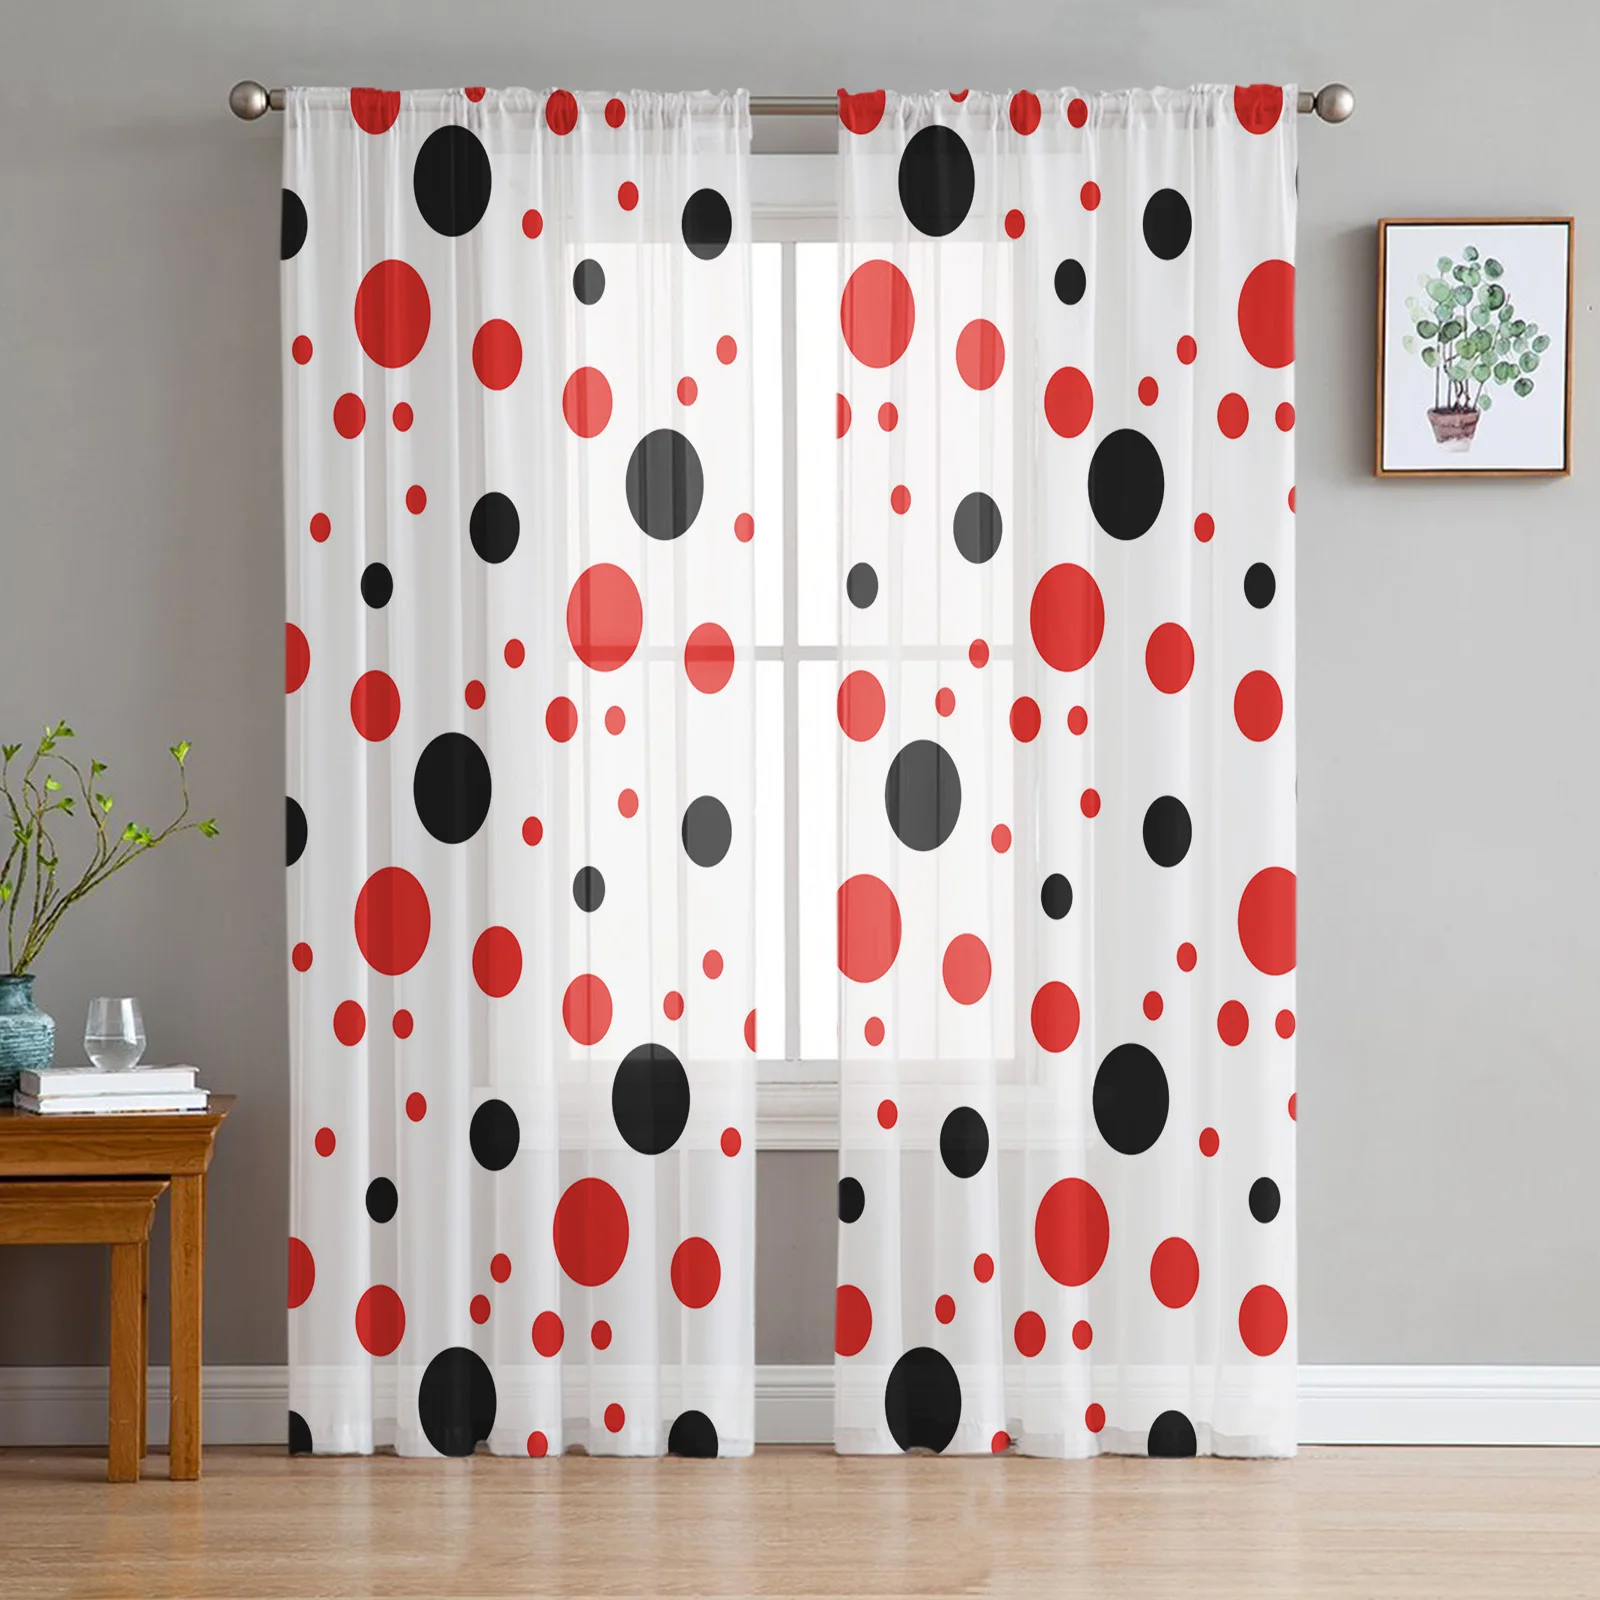 

Red And Black Dots White Sheer Window Curtains Bedroom Modern Chiffon Drape Tulle Valances Living Room Kitchen Voile Curtain